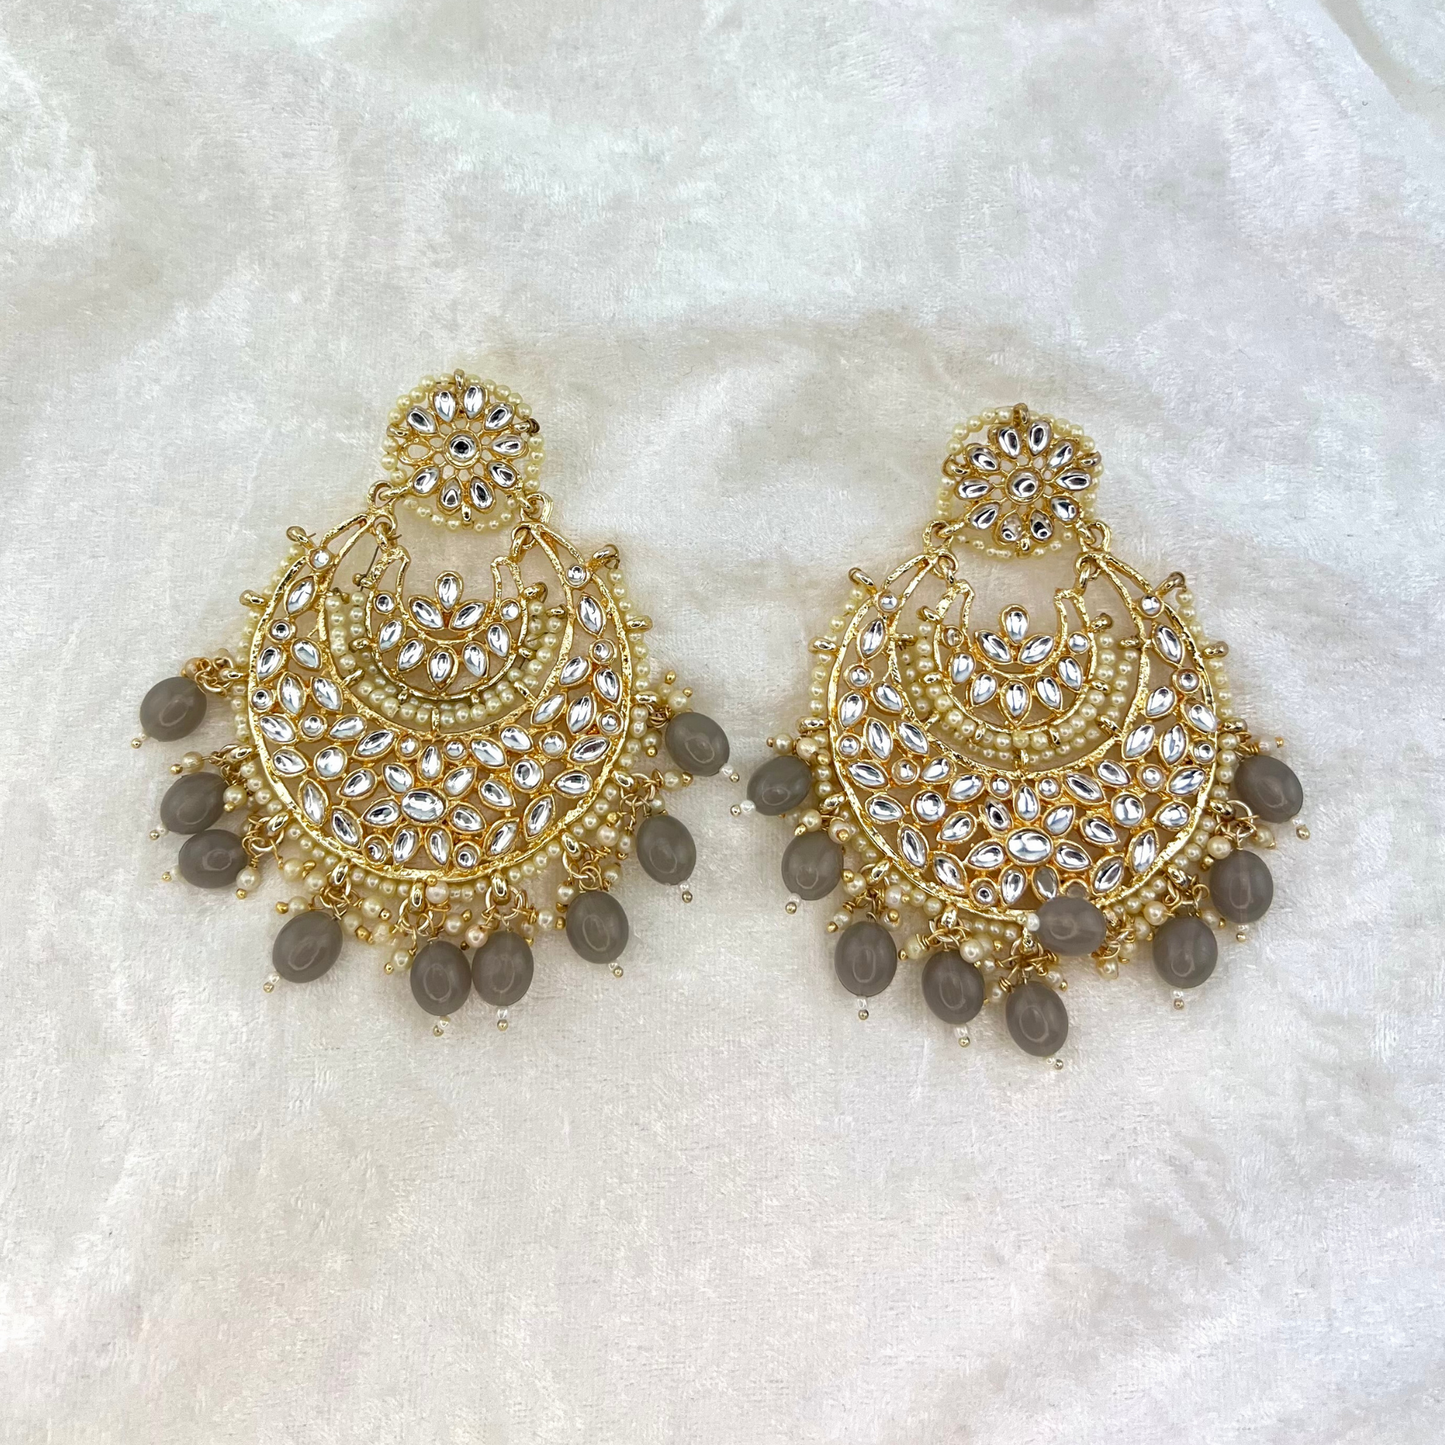 Indian wedding jewellery - large earrinfs with high quality stones and beads in grey